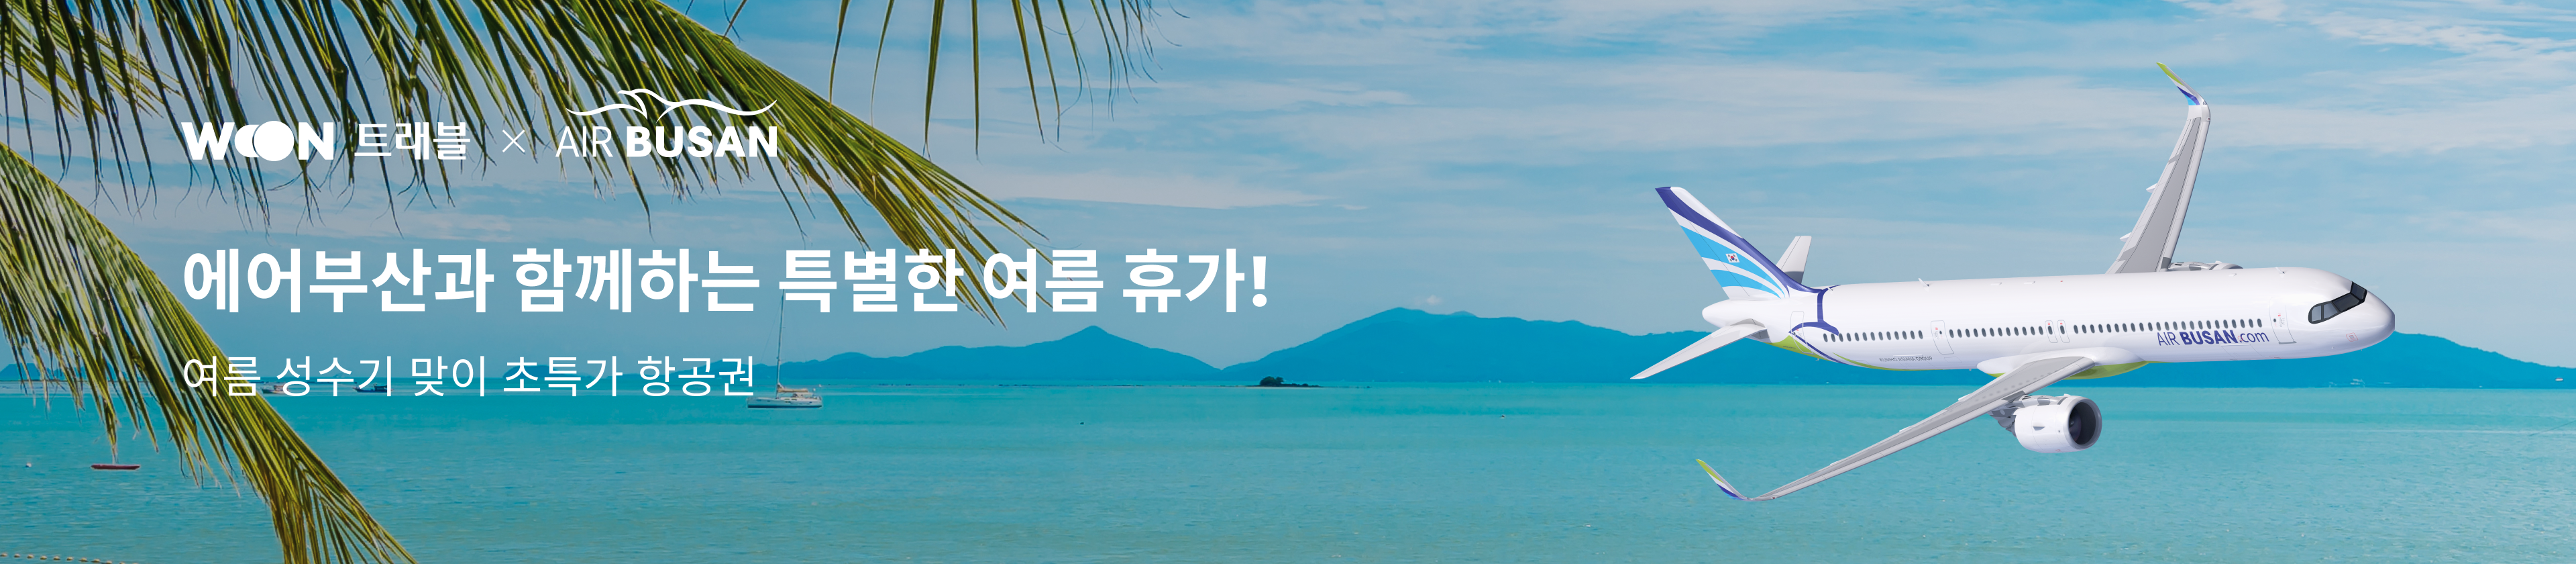 A promotional banner of of airbusan